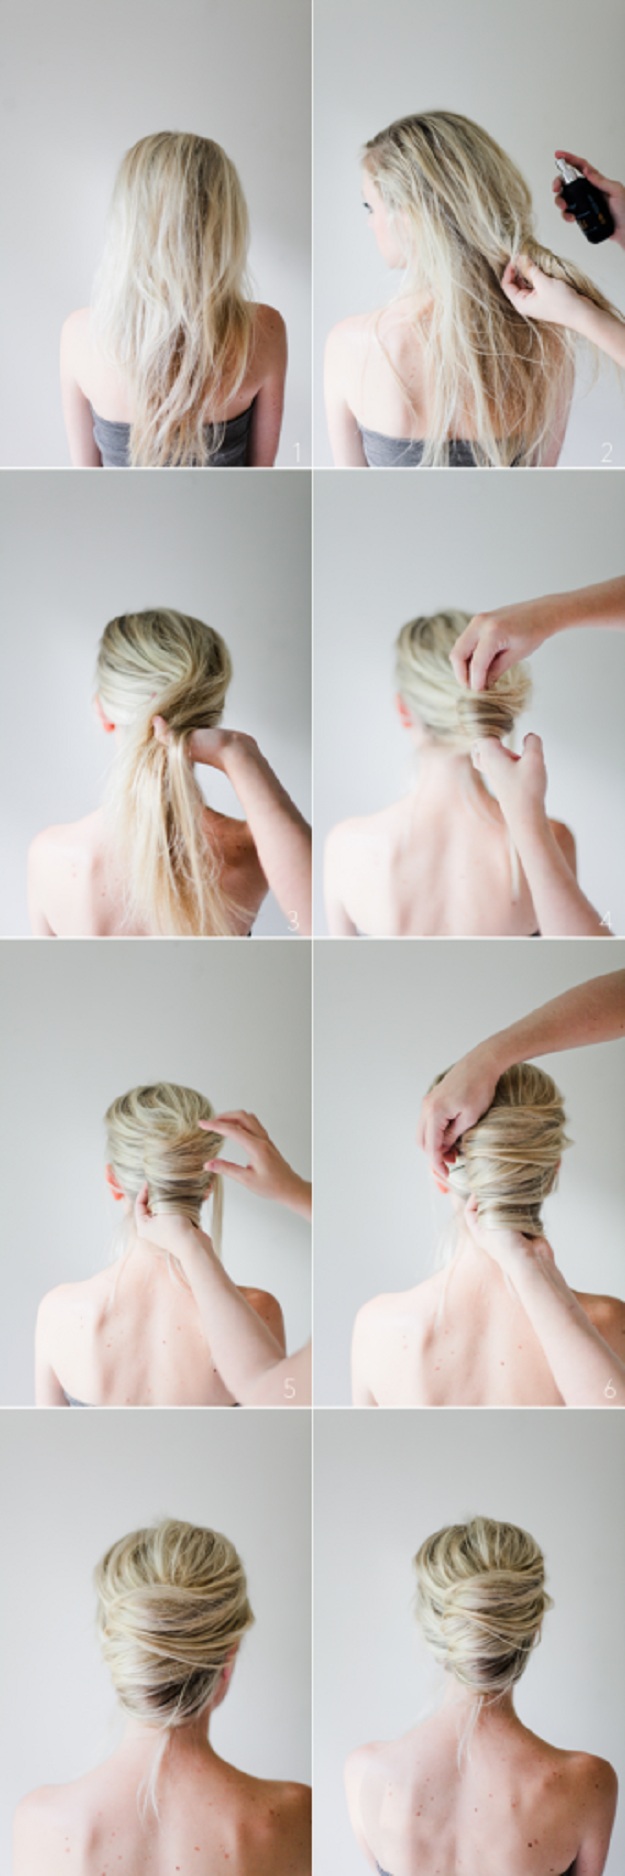 32 Chic 5 Minute Hairstyles Tutorials You May Love Styles